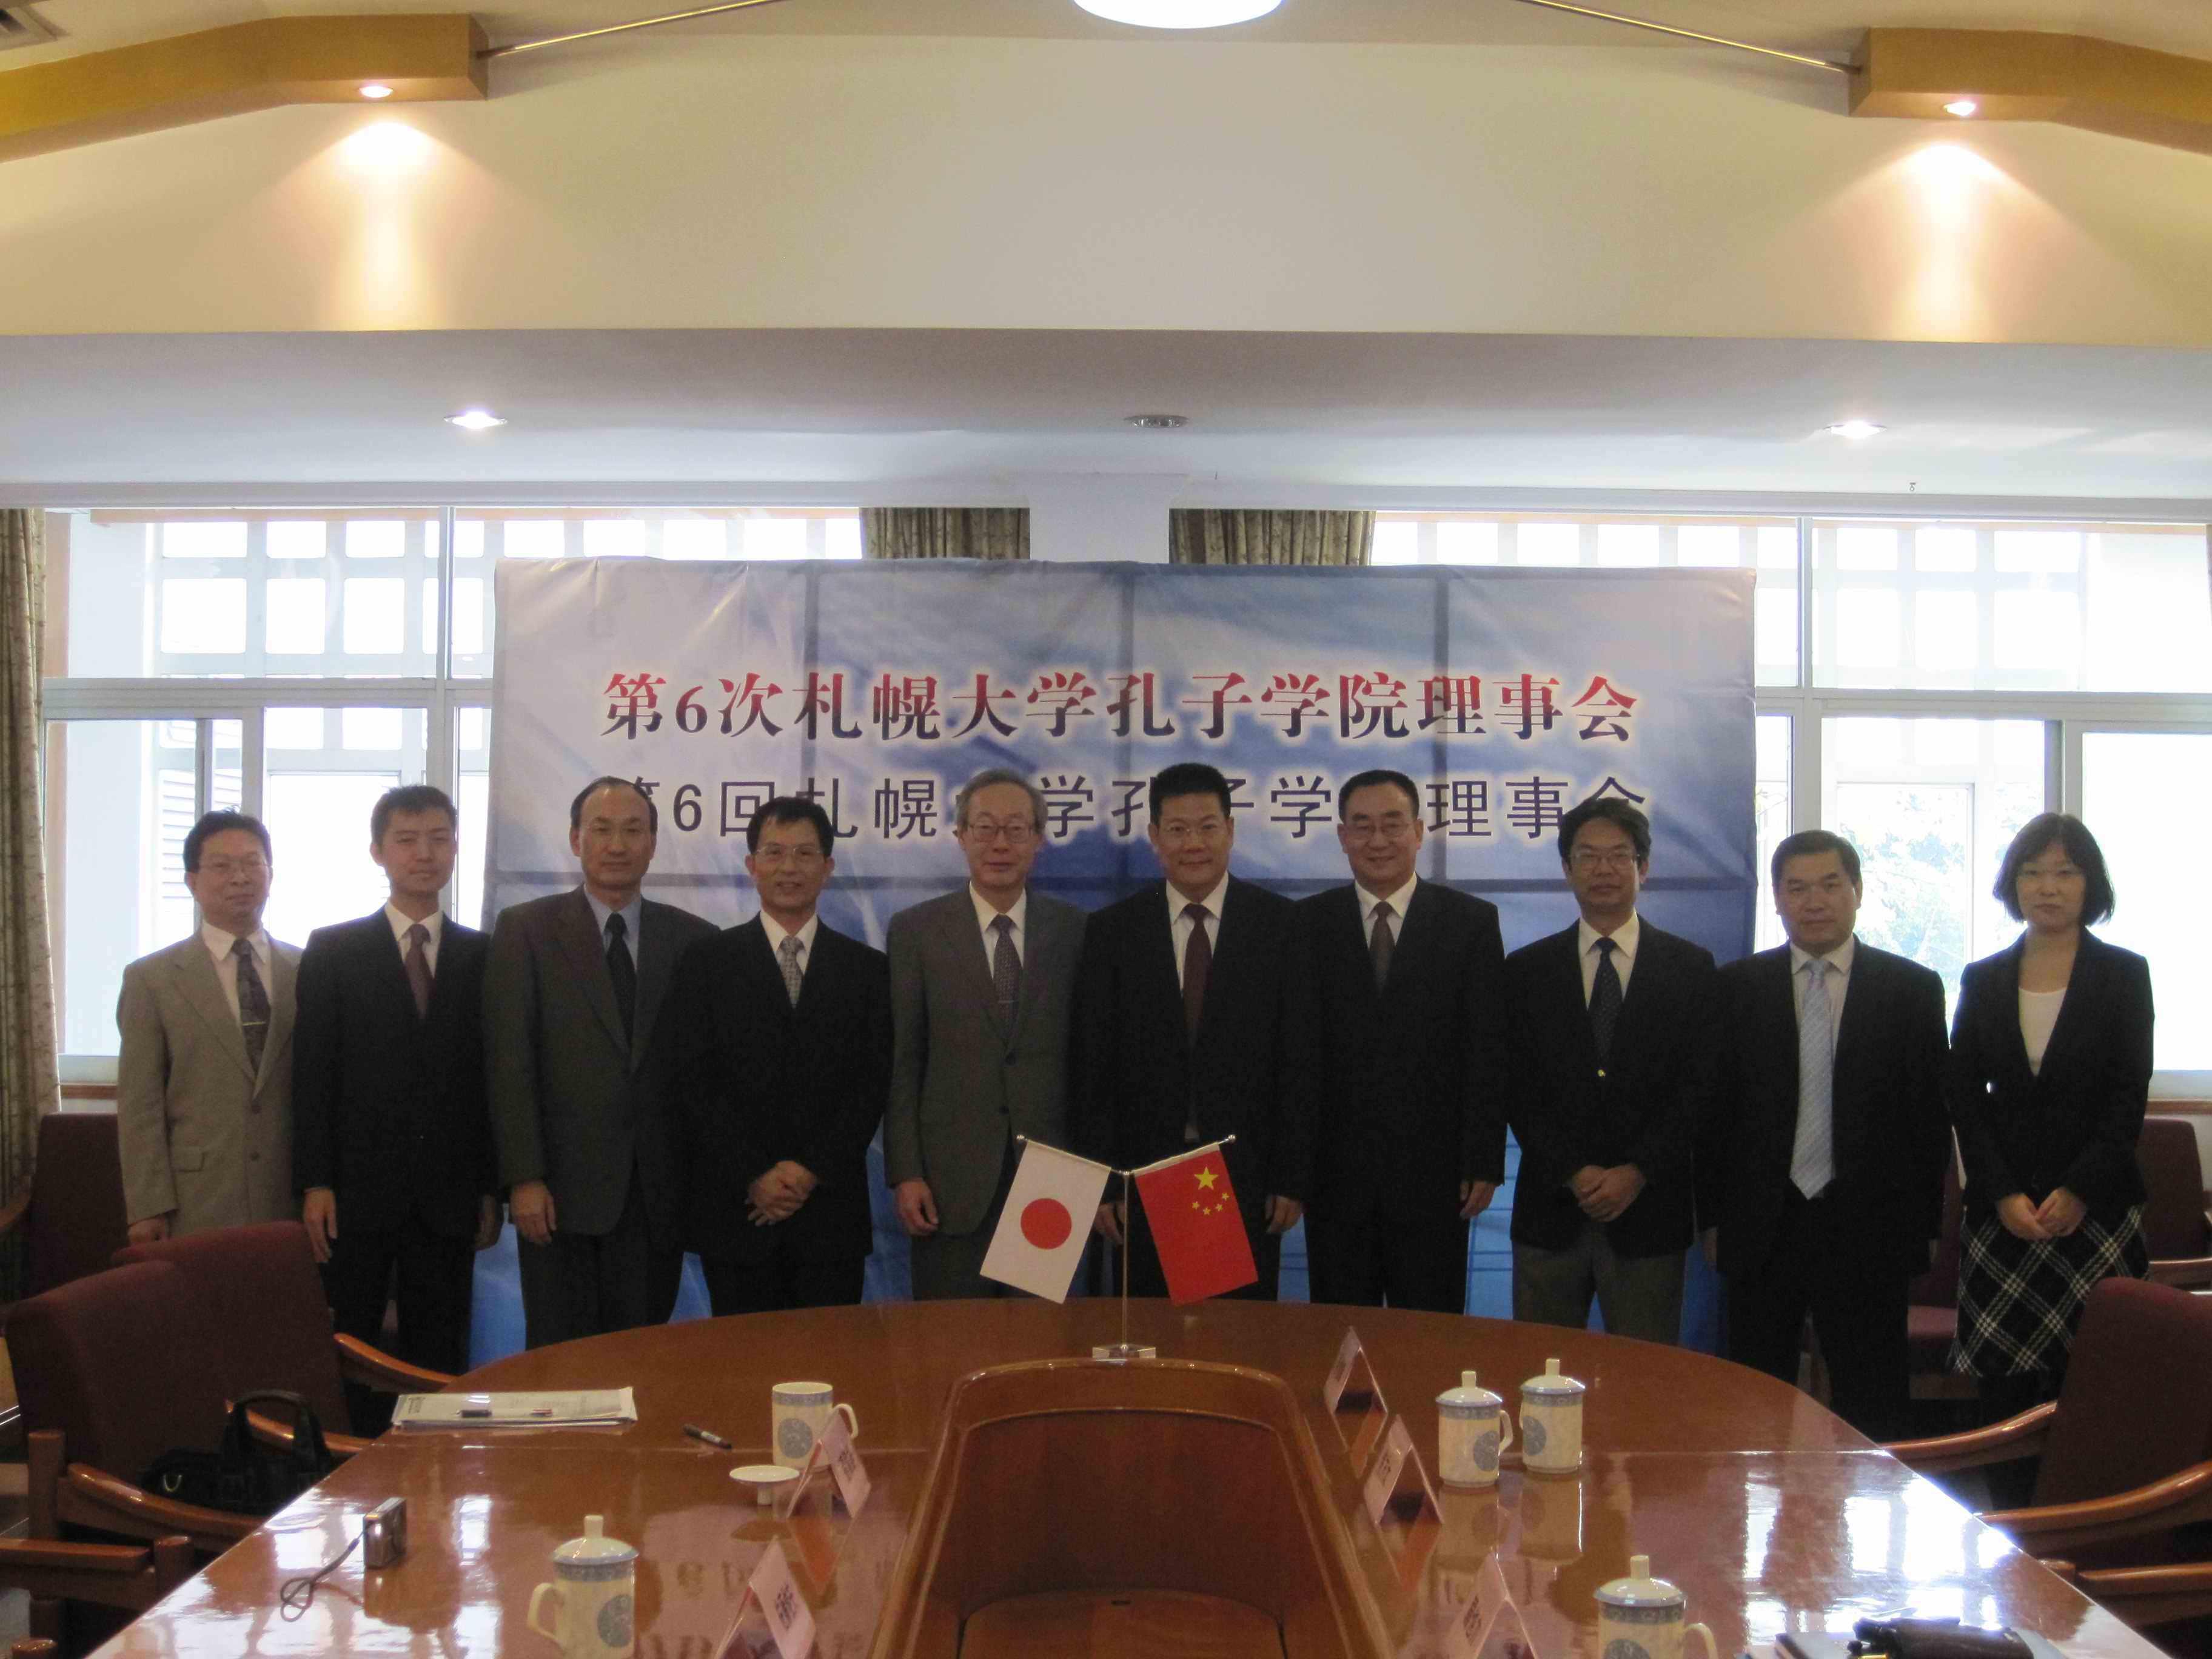 Delegation  from  the  Confucius  Institute  at  Sapporo  University  Visits  GDUFS